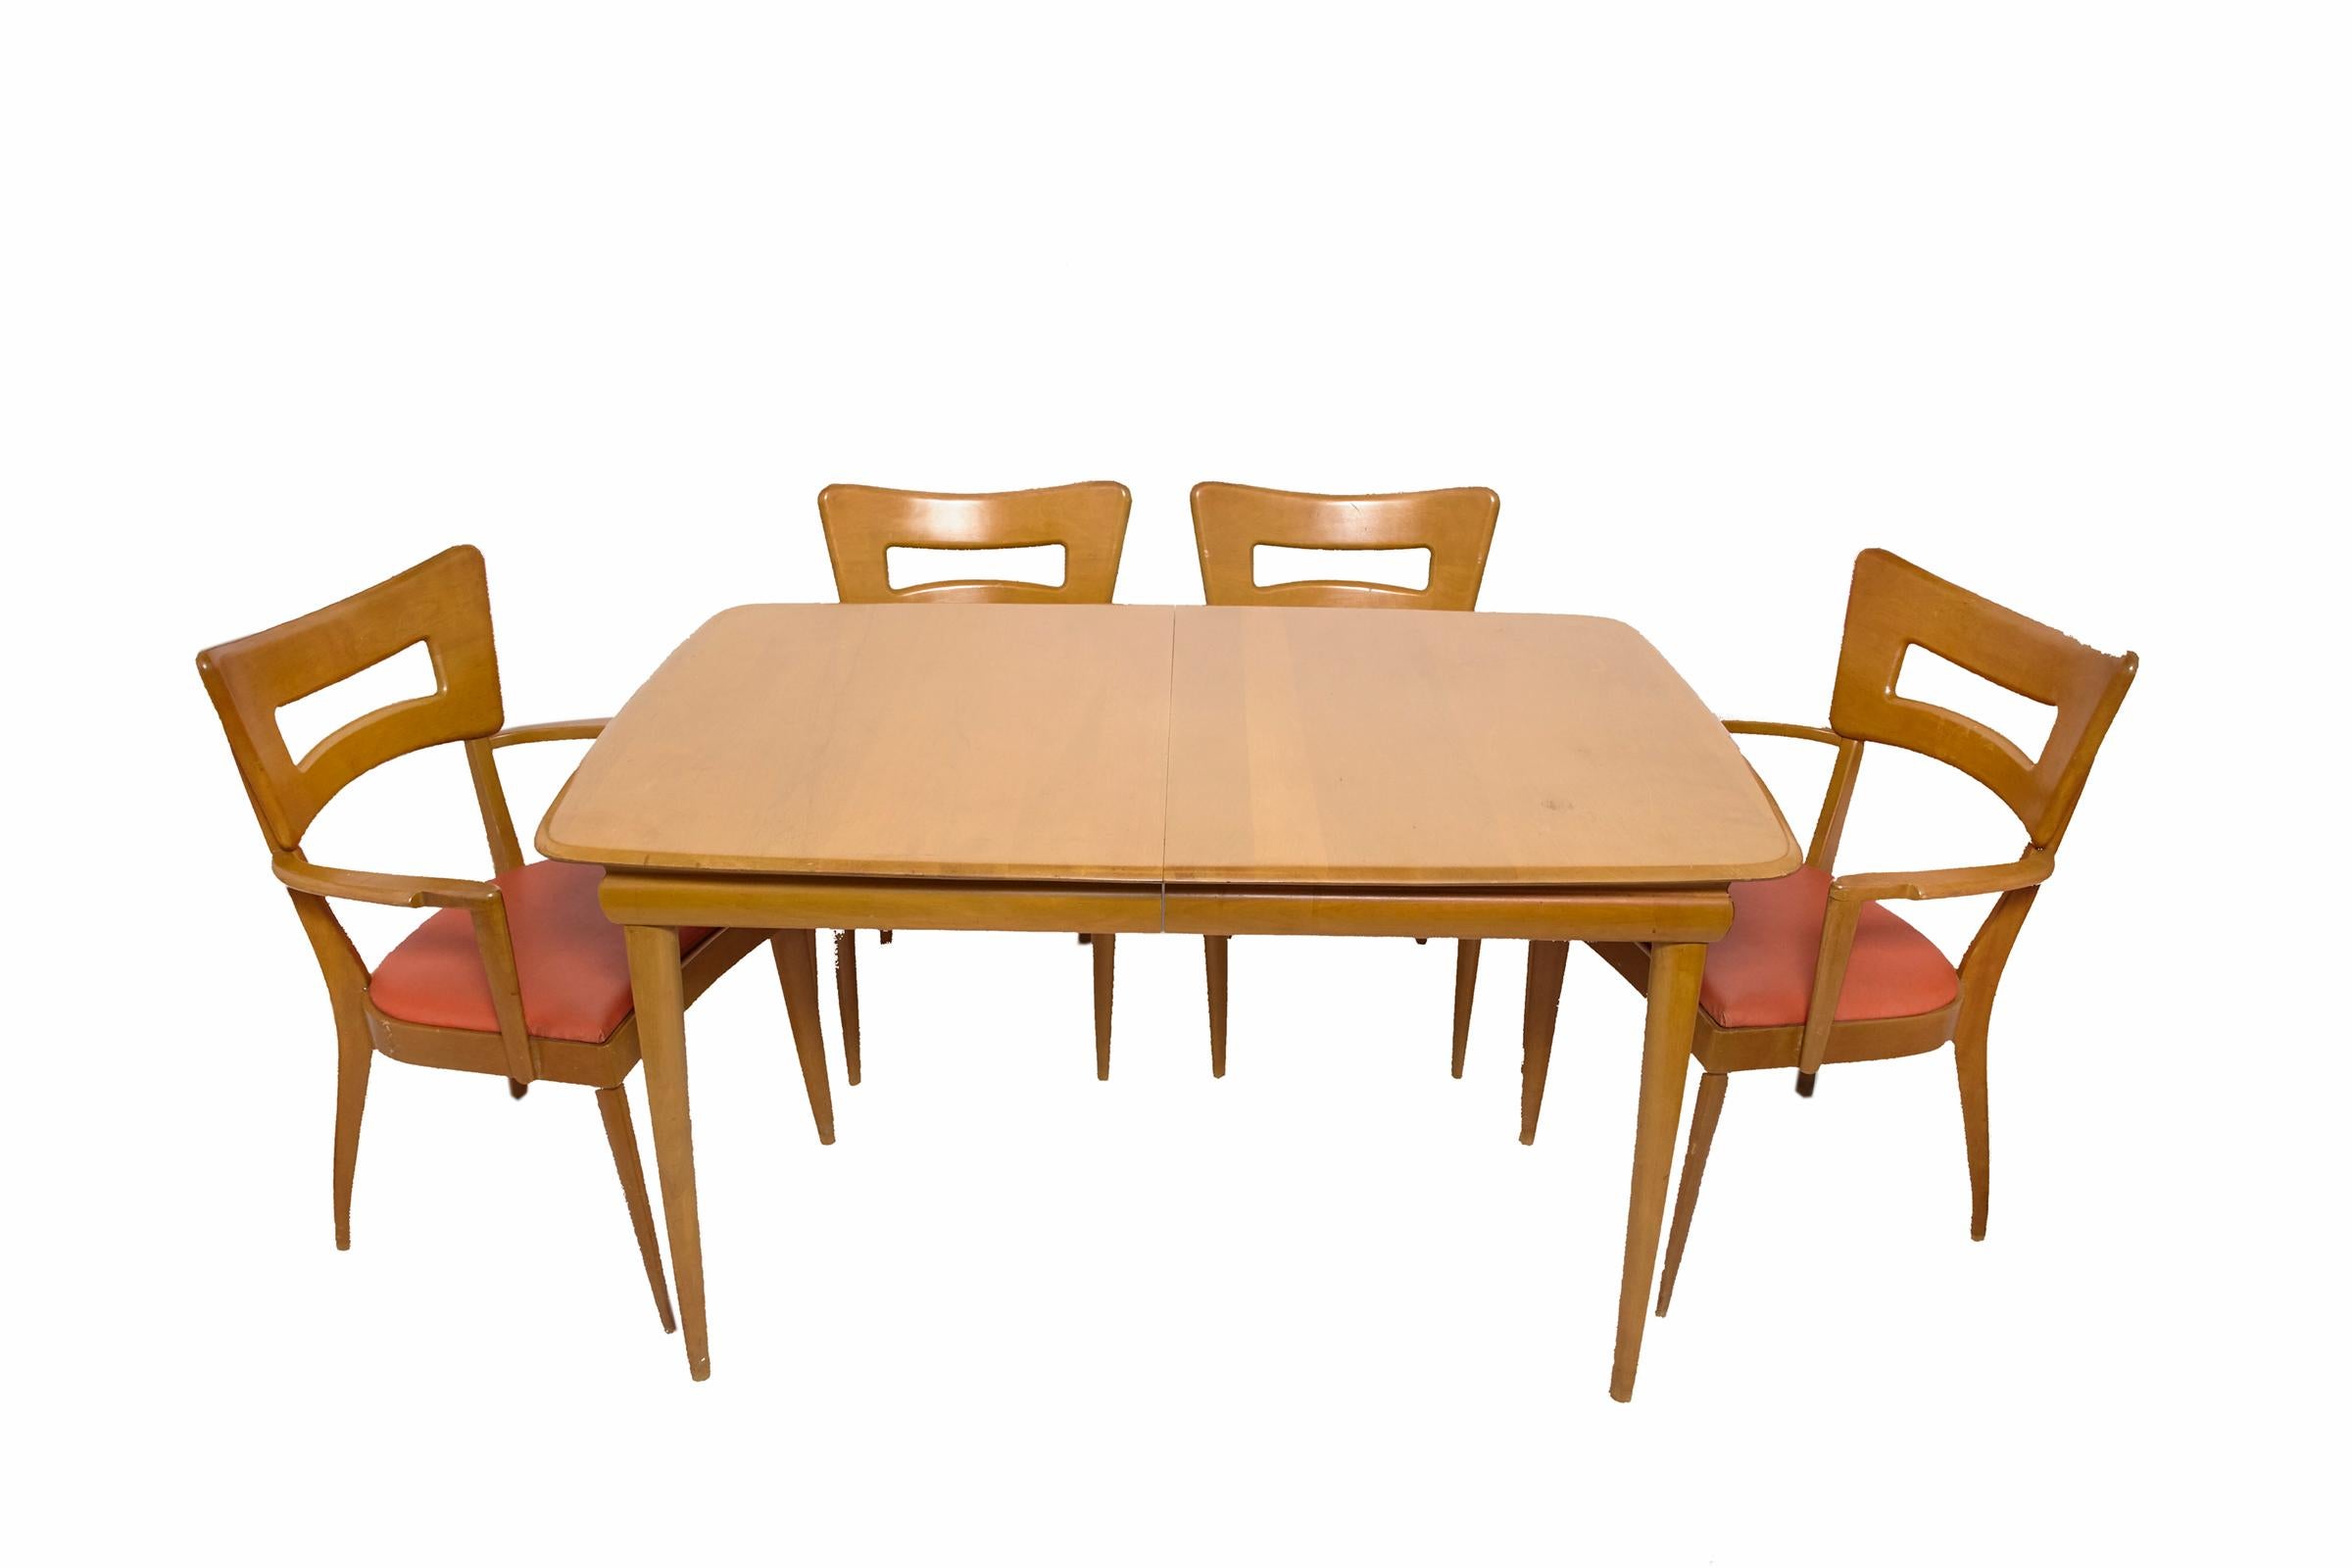 American Heywood Wakefield Mid-Century Modern Extension Dining Table, 6 Dogbone Chairs